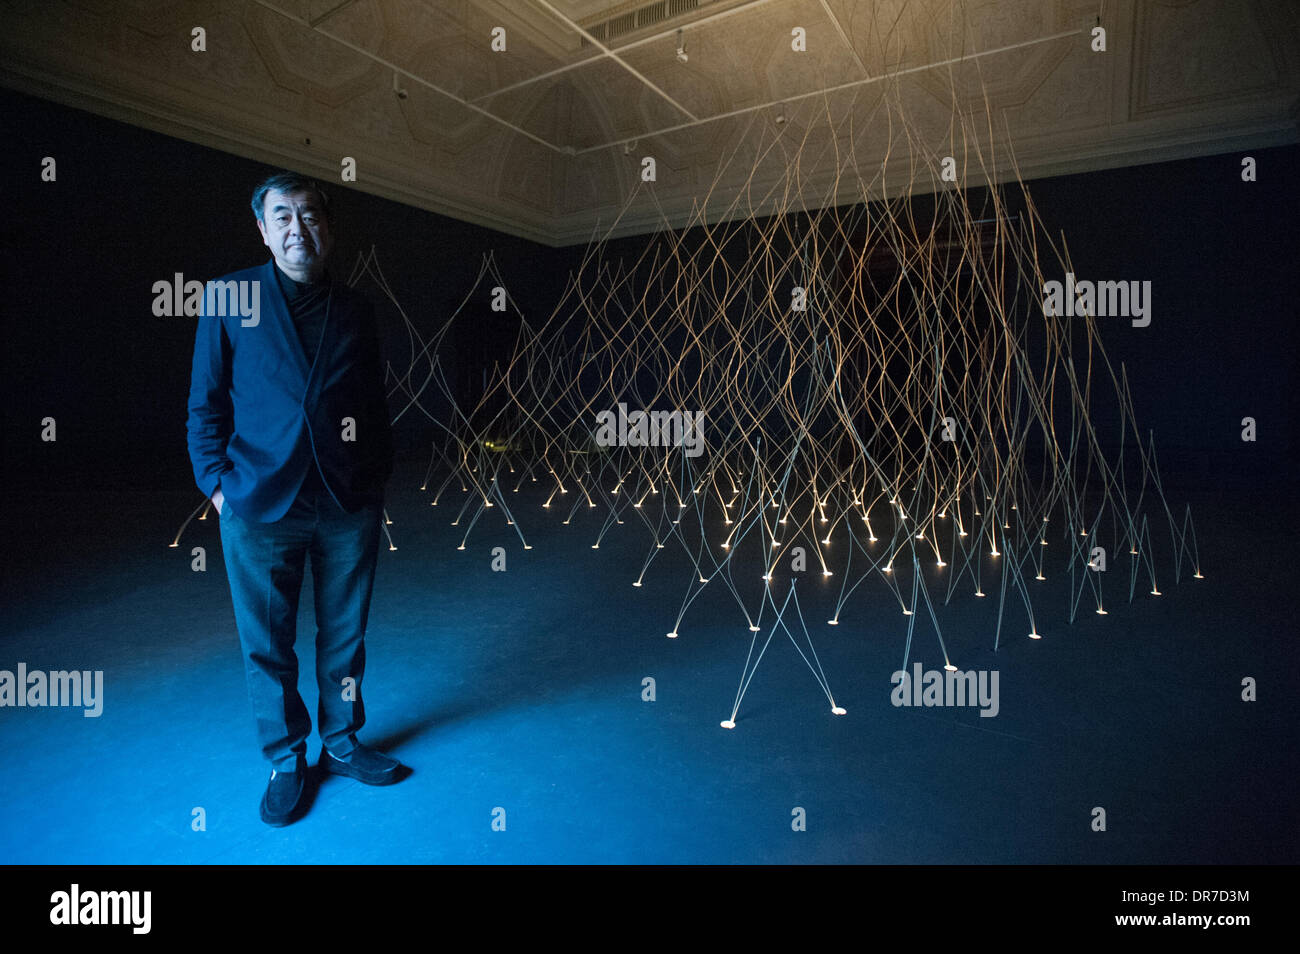 London, UK - 21 January 2014: architect Kengo Kuma poses next to their installation at the Sensing Spaces: Architecture Reimagined exhibition at the Royal Academy of Arts Credit:  Piero Cruciatti/Alamy Live News Stock Photo